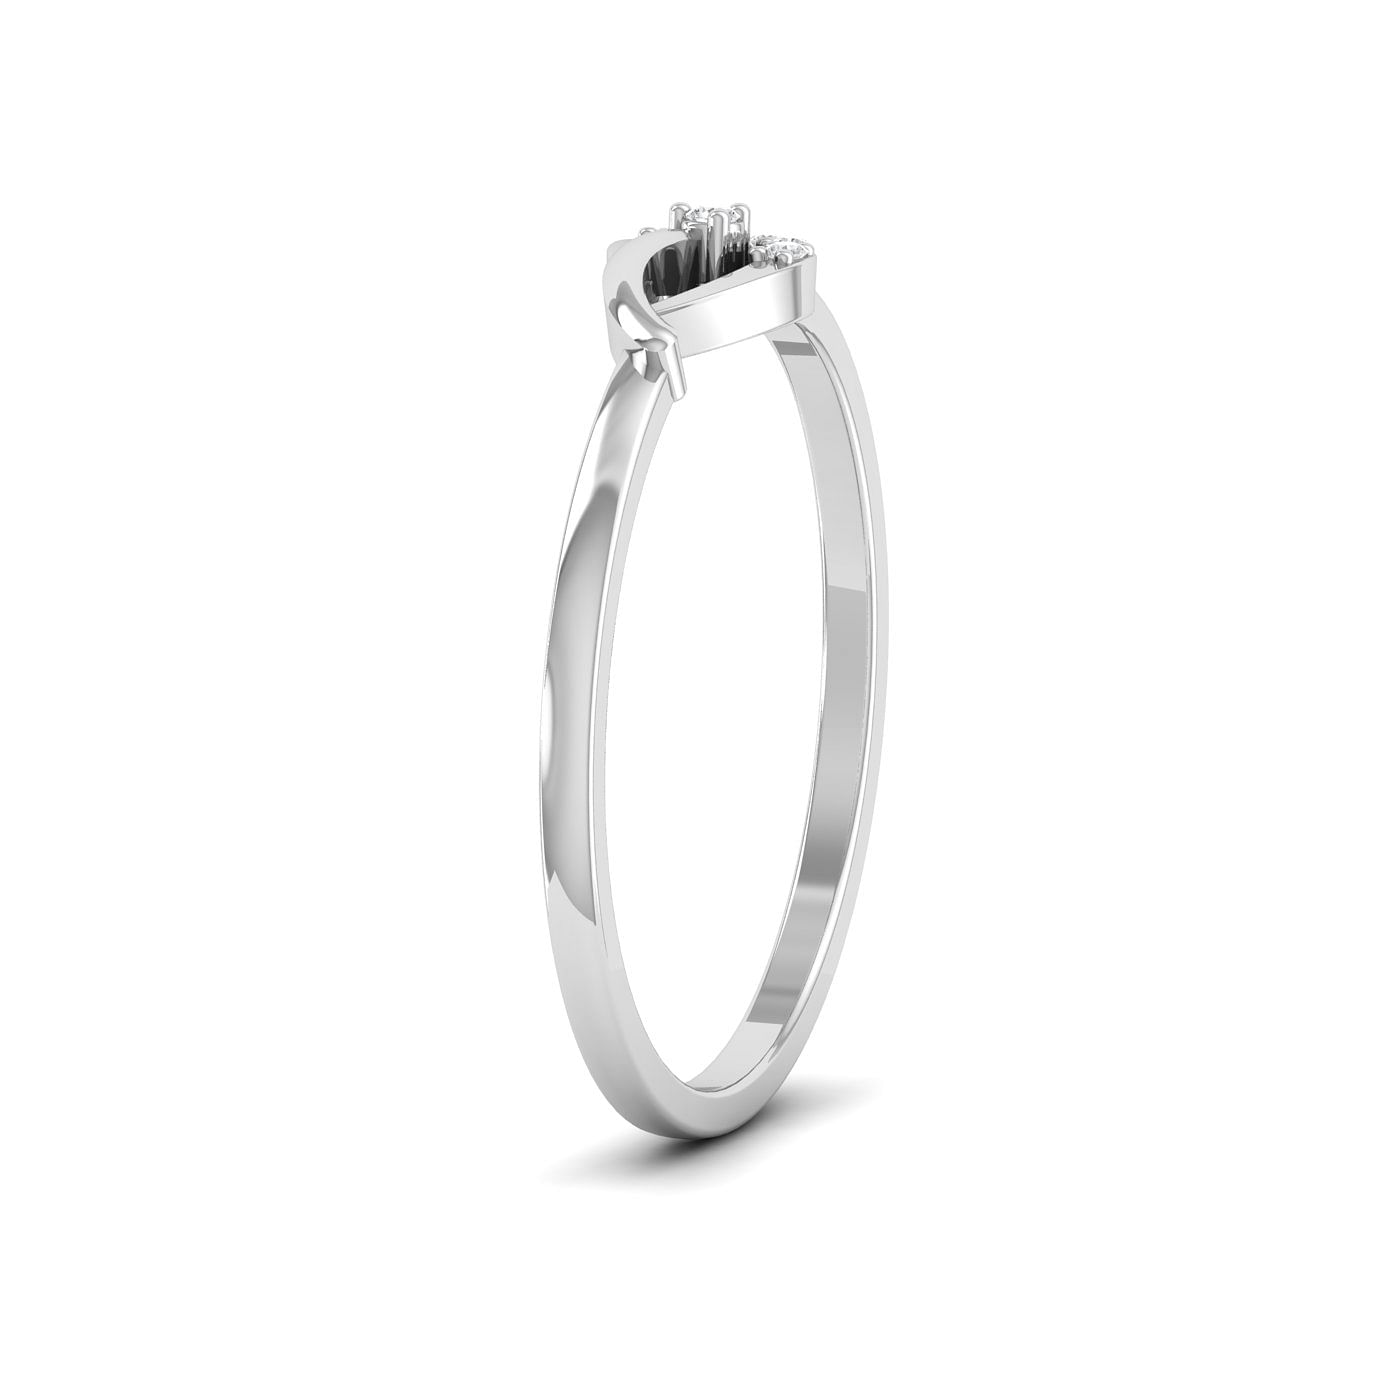 Light weight Roni Diamond Delicate Ring white gold for women